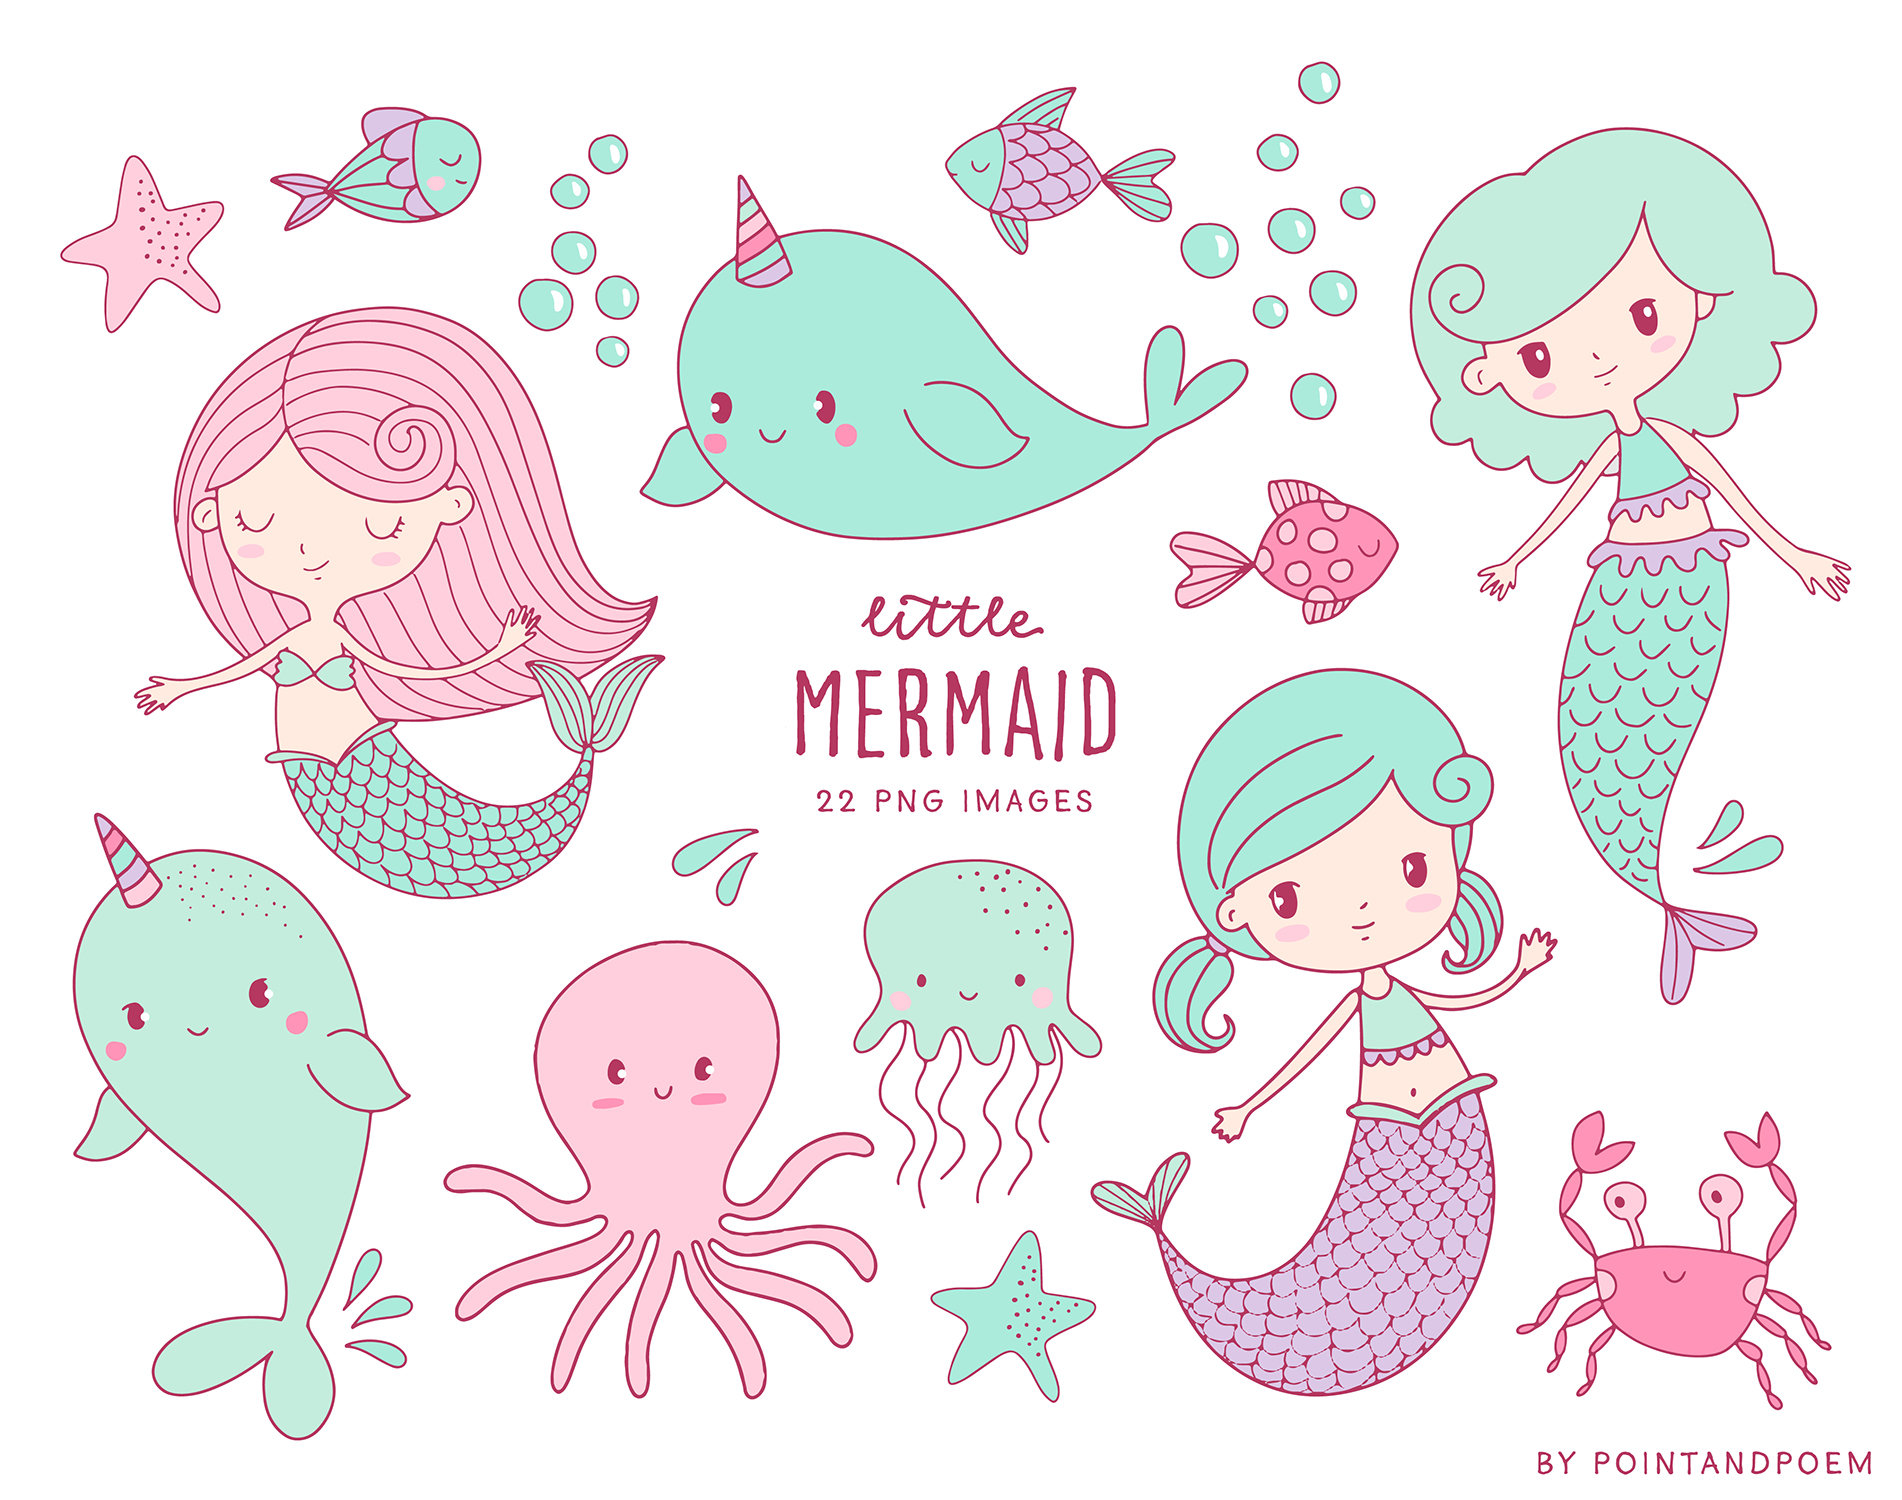 22 Adorable Mermaid Crafts for Kids